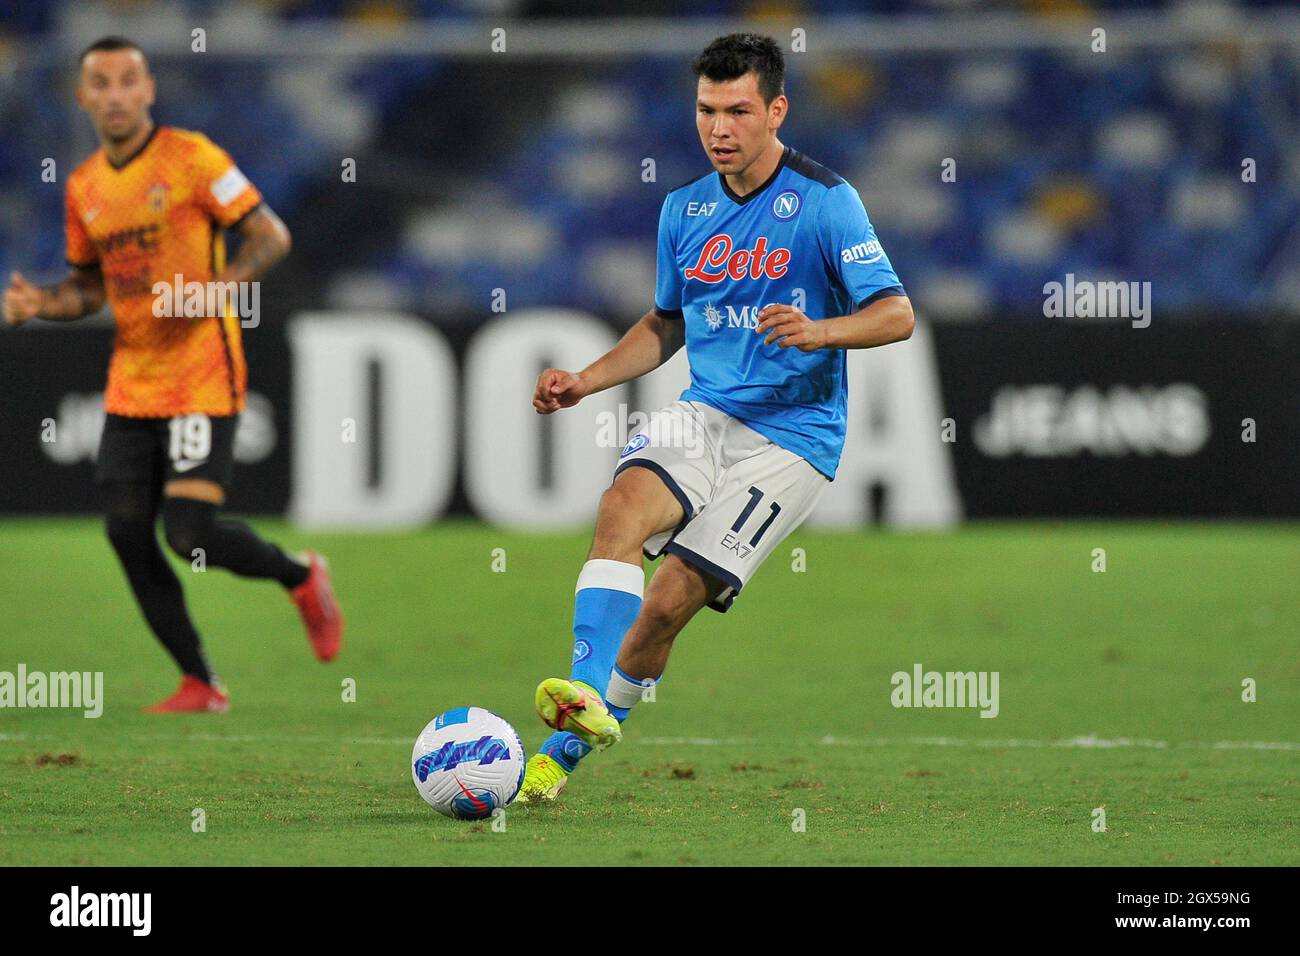 Hirving Lozano player of Napoli, during the friendly match between Napoli  vs Benevento final result 1-5, match played at the Diego Armando Maradona  st Stock Photo - Alamy